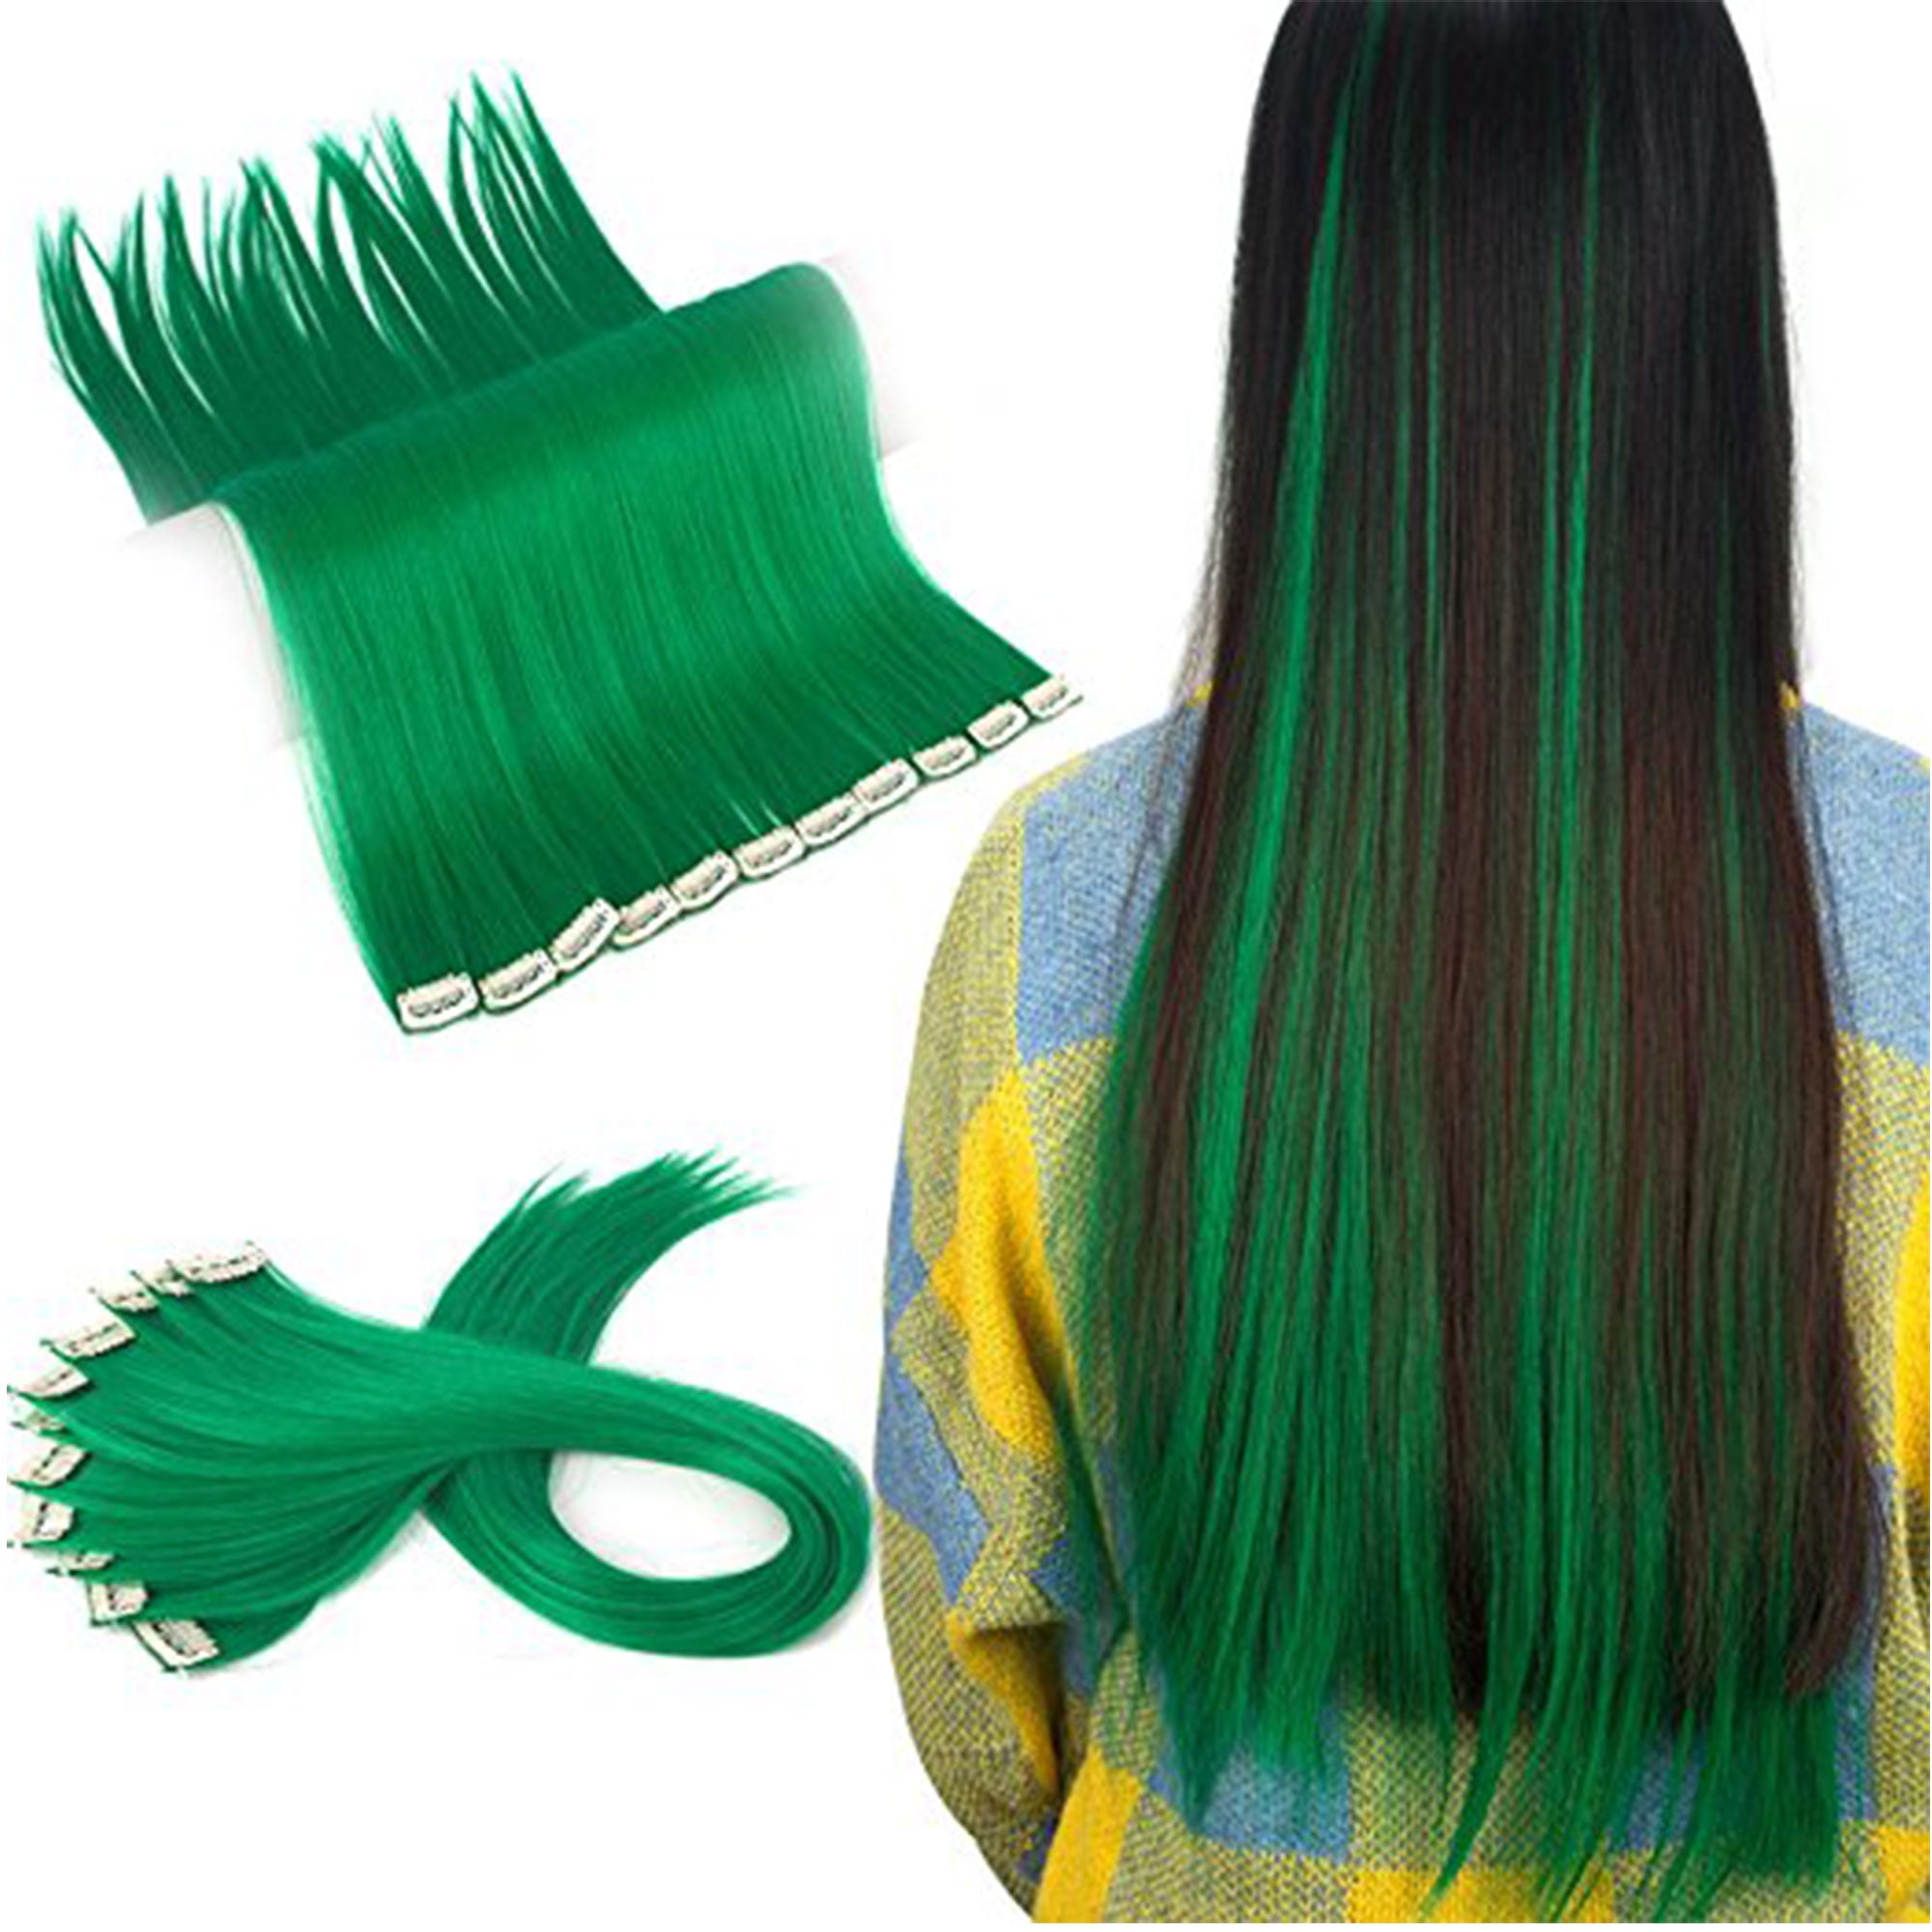 Florata 11pcs Straight Colored Clip in Hair Extensions Party Highlight Multiple Colors Hairpieces, Size: 24 inch, 11 Color